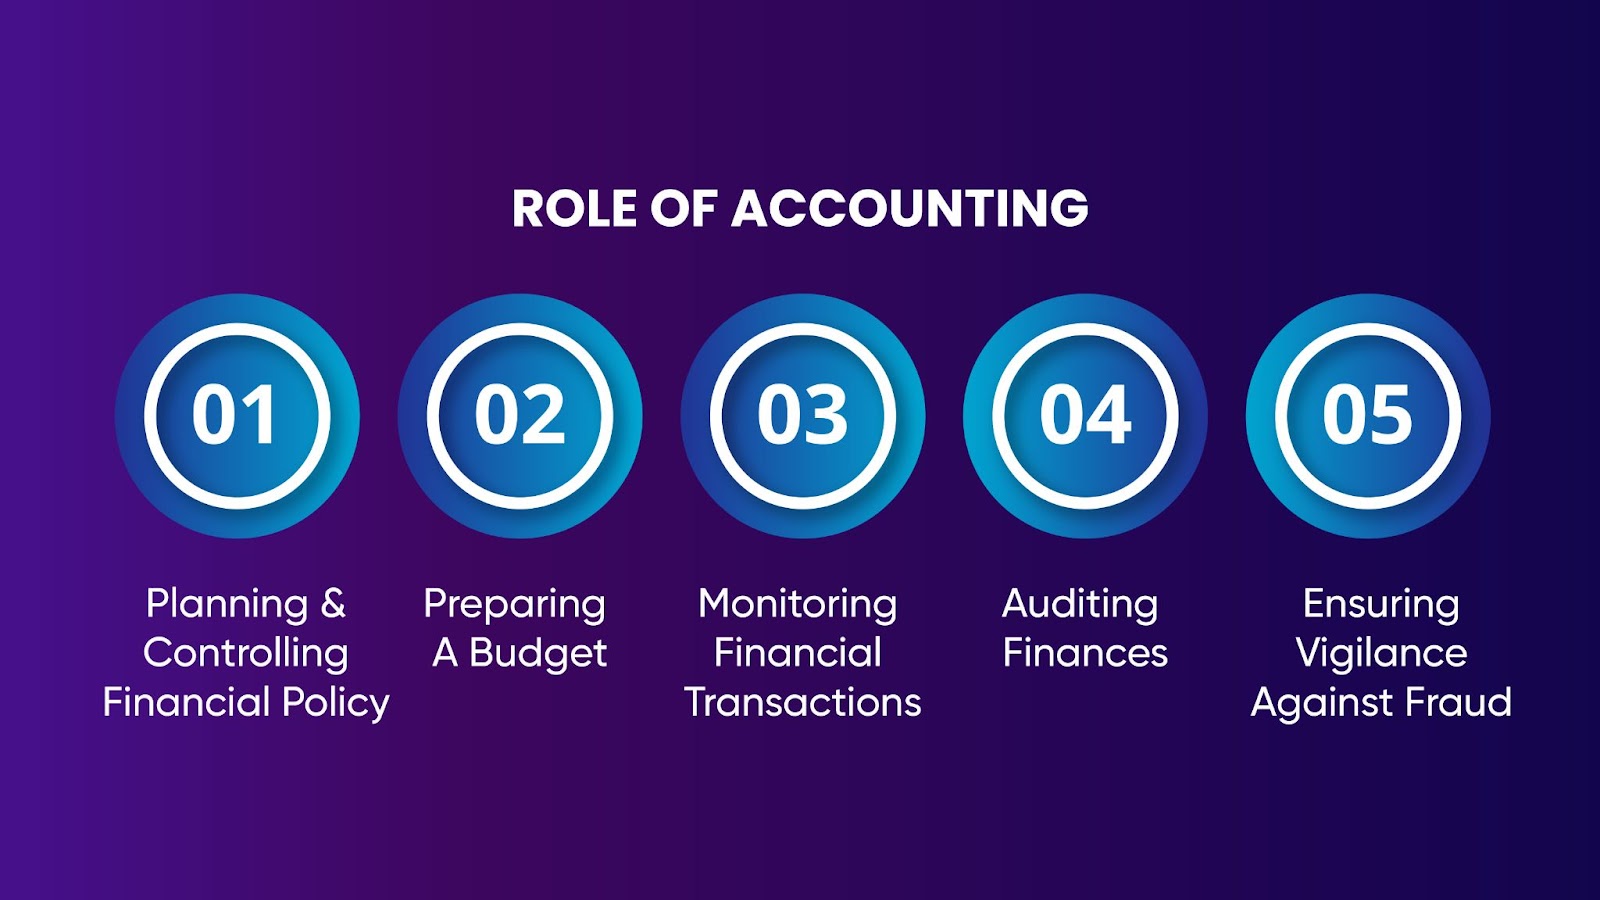 Roles Of Accounting